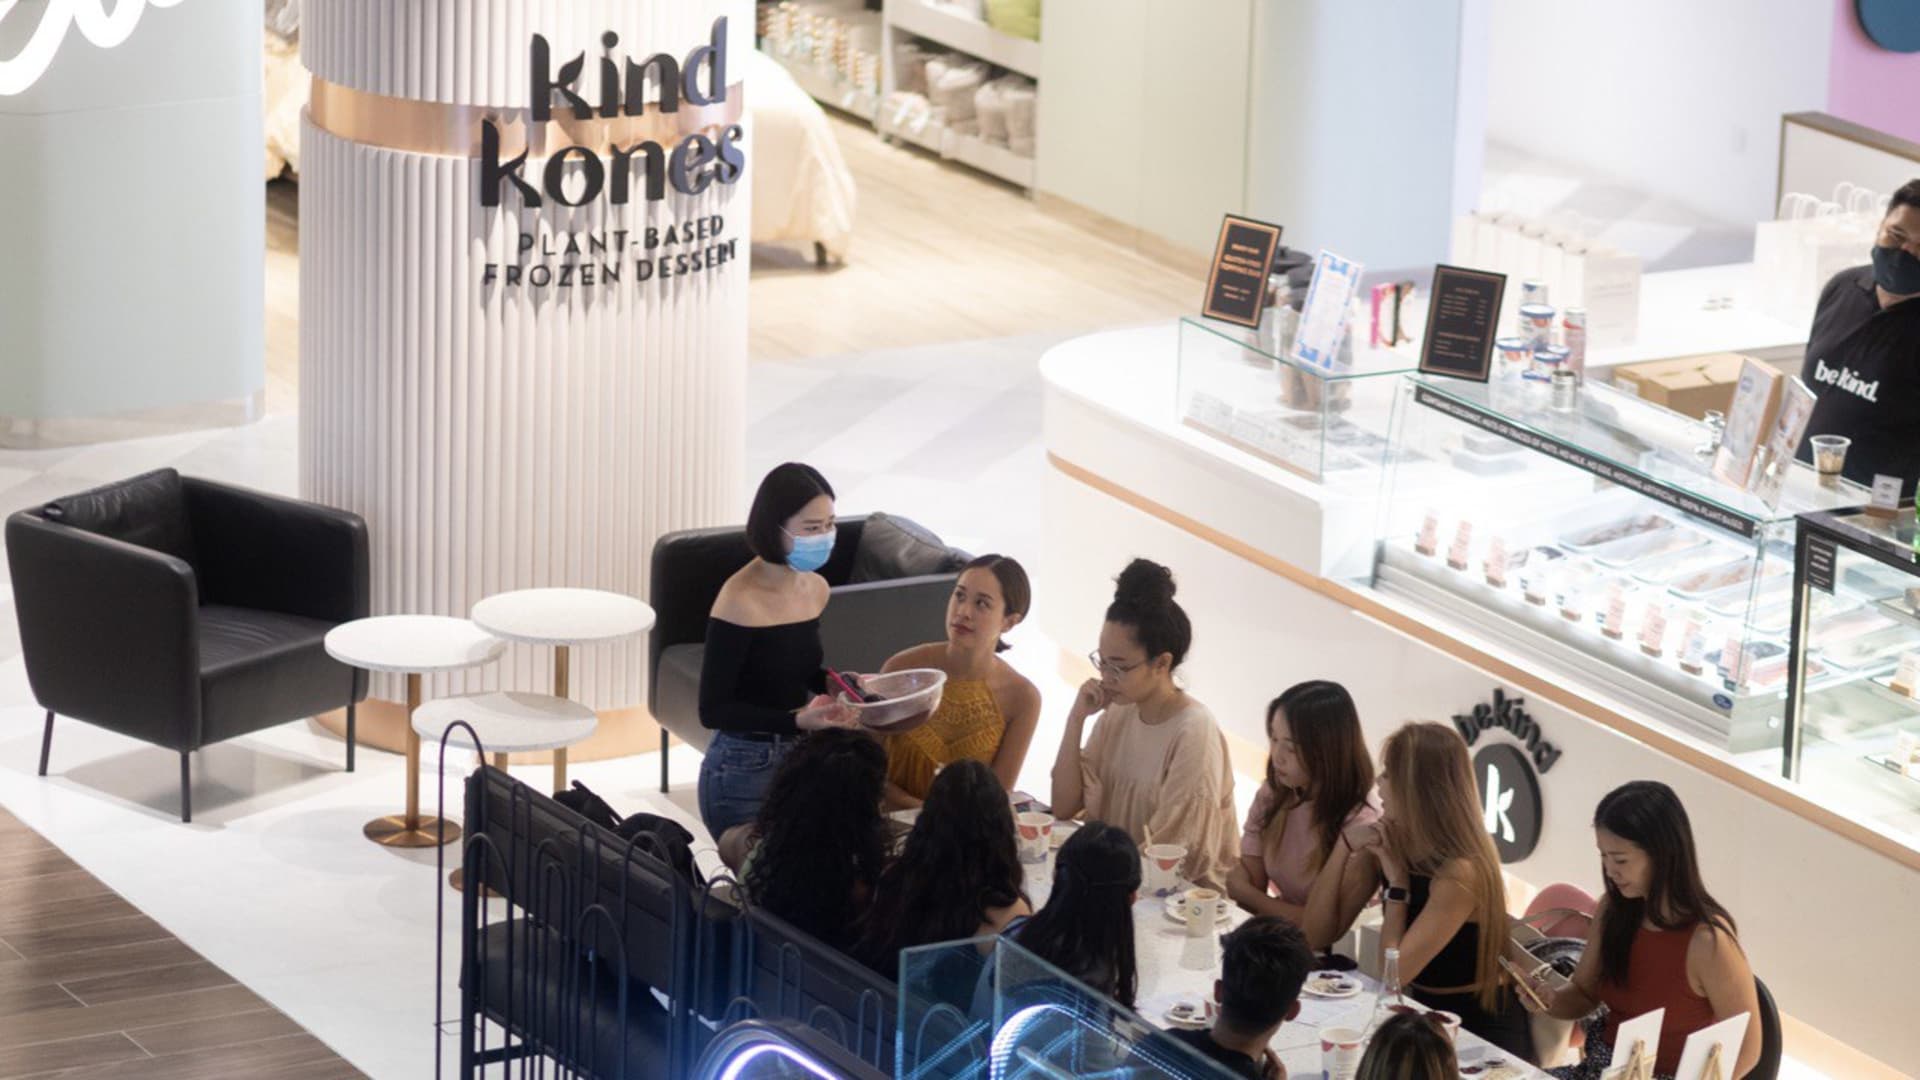 Kind Kones now operate 4 stores across Malaysia and Singapore, with hopes to expand to Thailand and Indonesia.